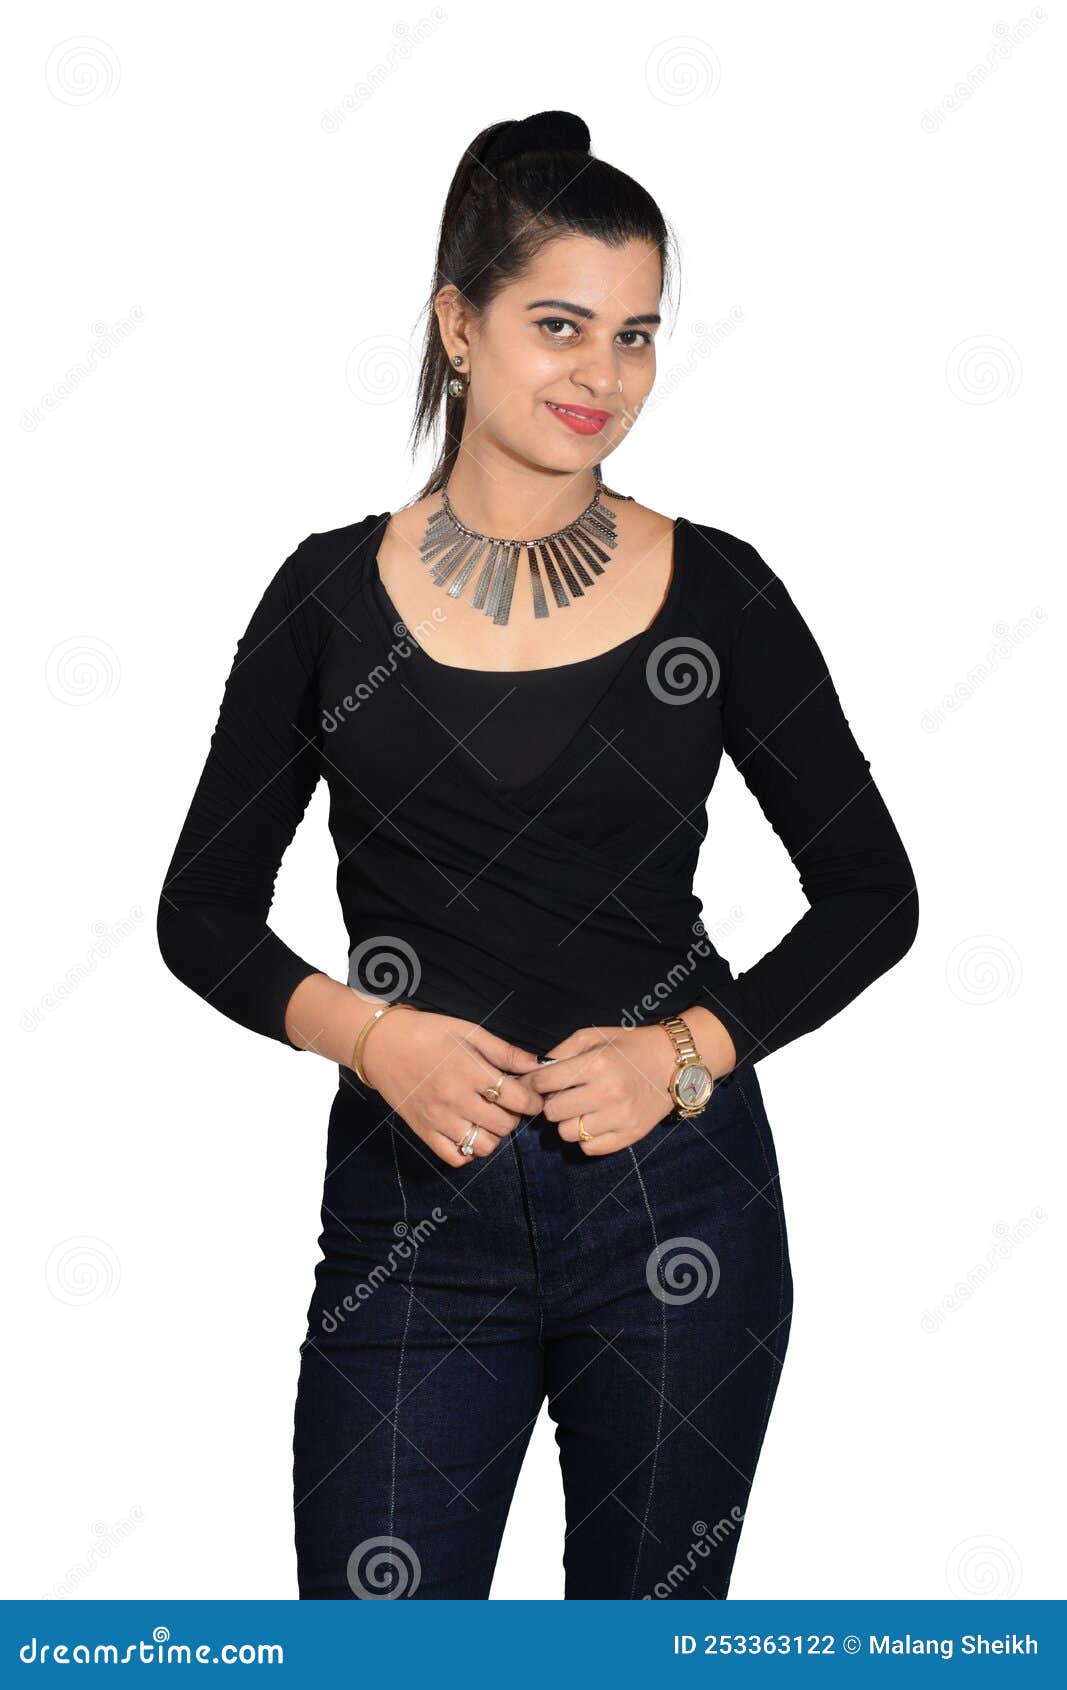 South East Asian Indian 26 Year Old Beautiful Girl with Modern Dress Fashion  Model Poses Stock Photo - Image of good, confident: 253363122